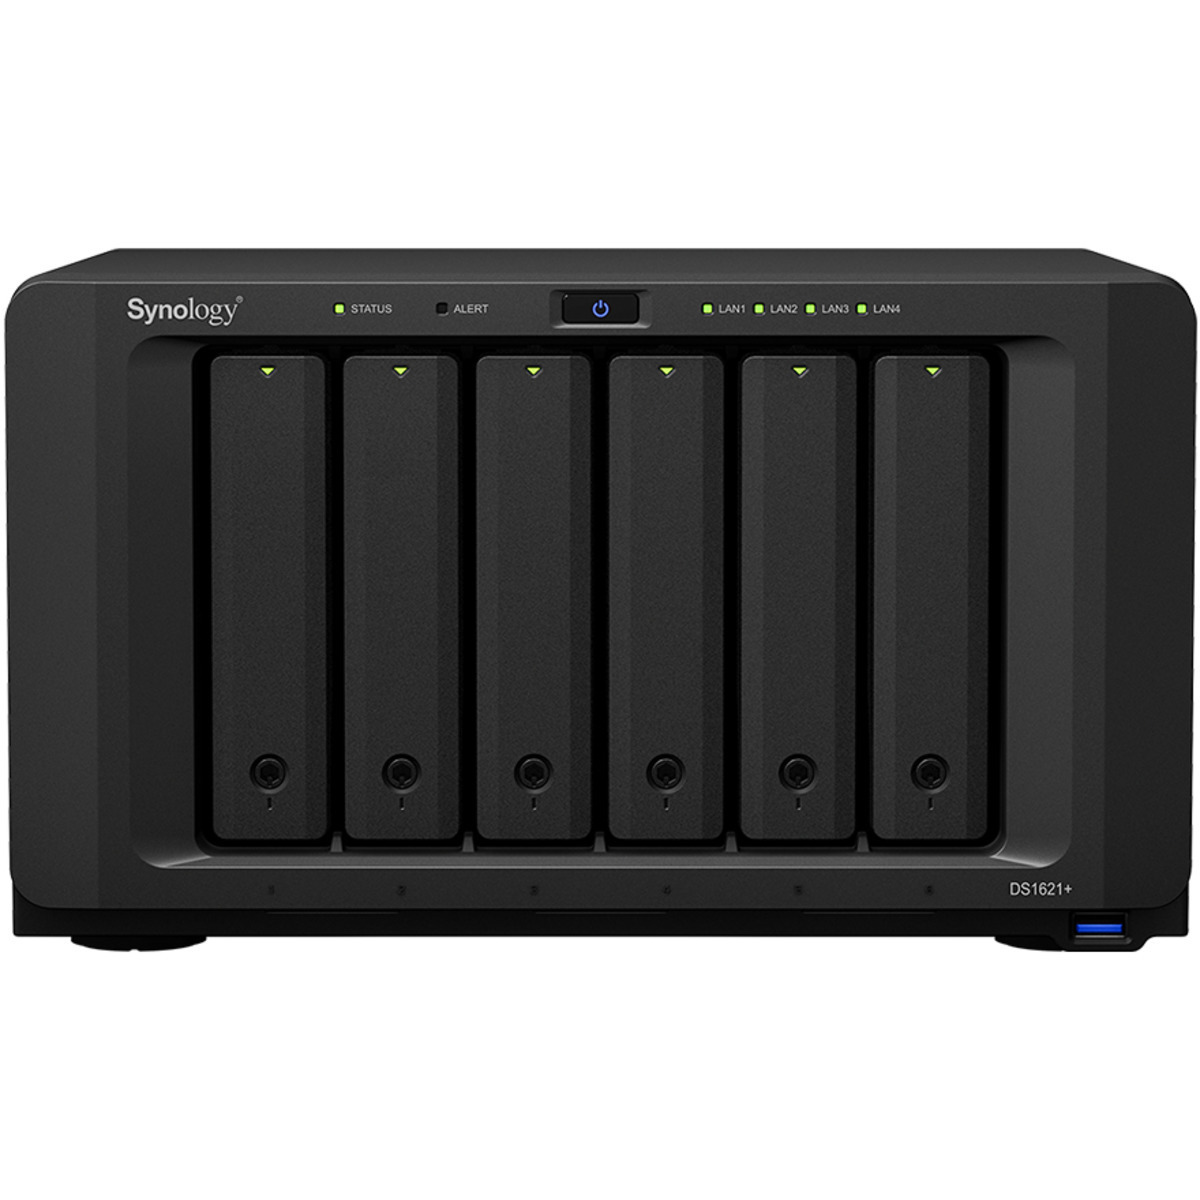 Synology DiskStation DS1621+ 20tb 6-Bay Desktop Multimedia / Power User / Business NAS - Network Attached Storage Device 5x4tb Western Digital Red SA500 WDS400T1R0A 2.5 560/530MB/s SATA 6Gb/s SSD NAS Class Drives Installed - Burn-In Tested - FREE RAM UPGRADE DiskStation DS1621+